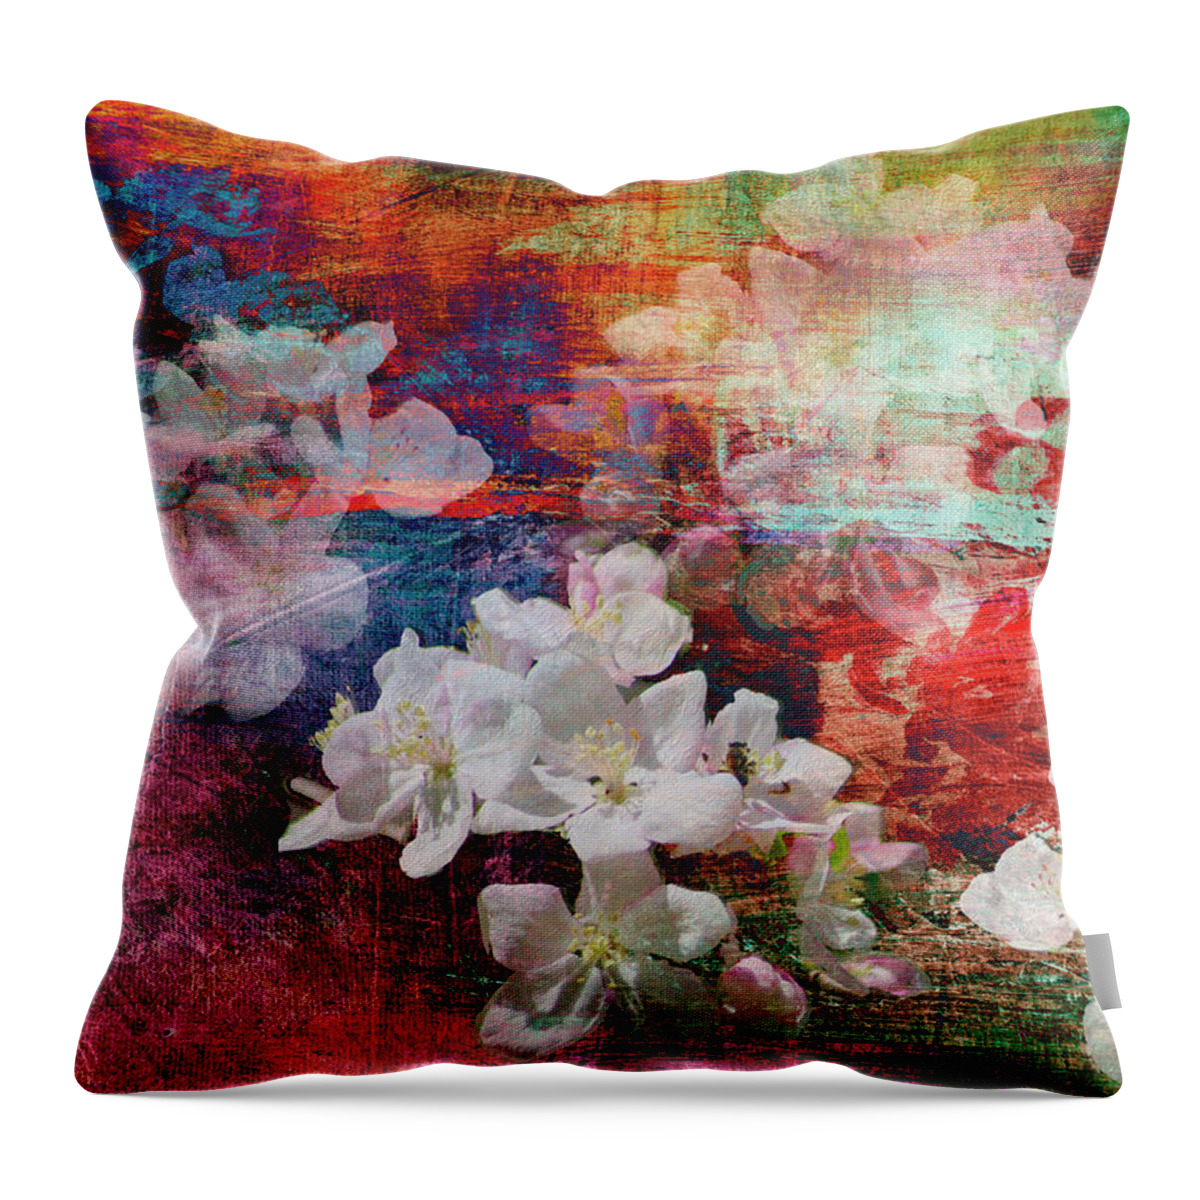 Floral Throw Pillow featuring the digital art Cherry Blossoms by Sandra Selle Rodriguez